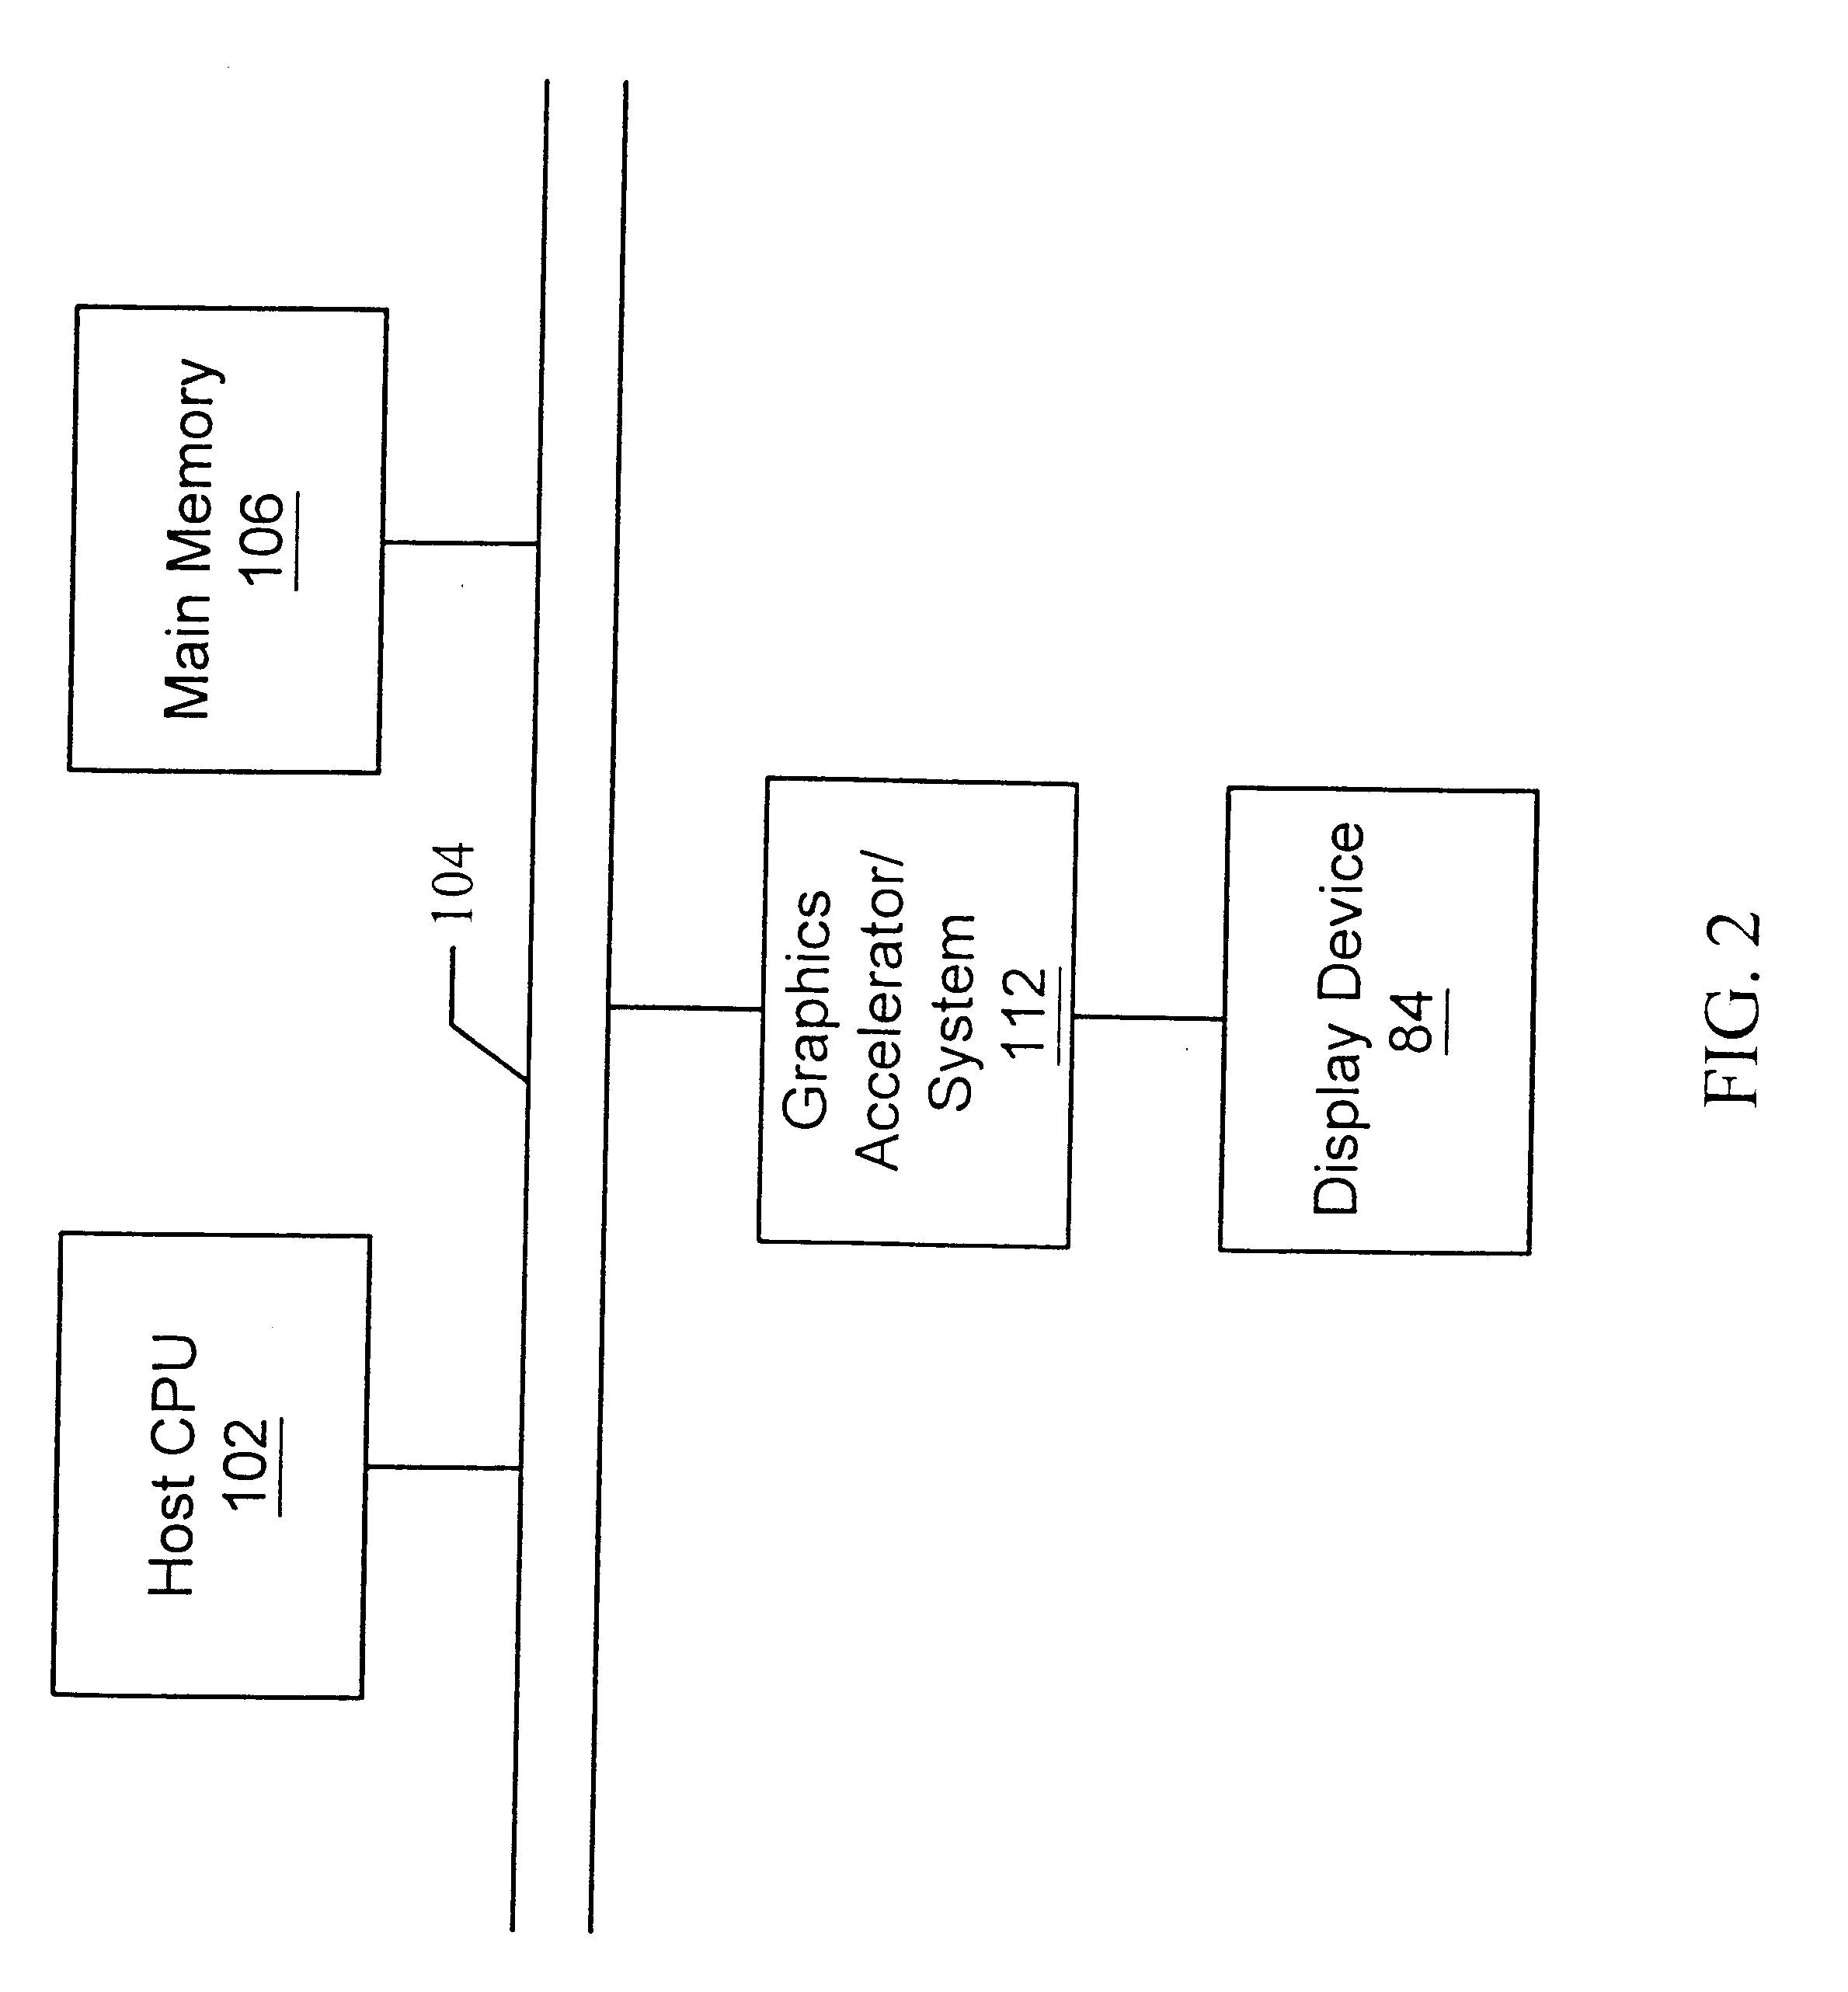 Dynamically adjusting a sample-to-pixel filter in response to user input and/or sensor input